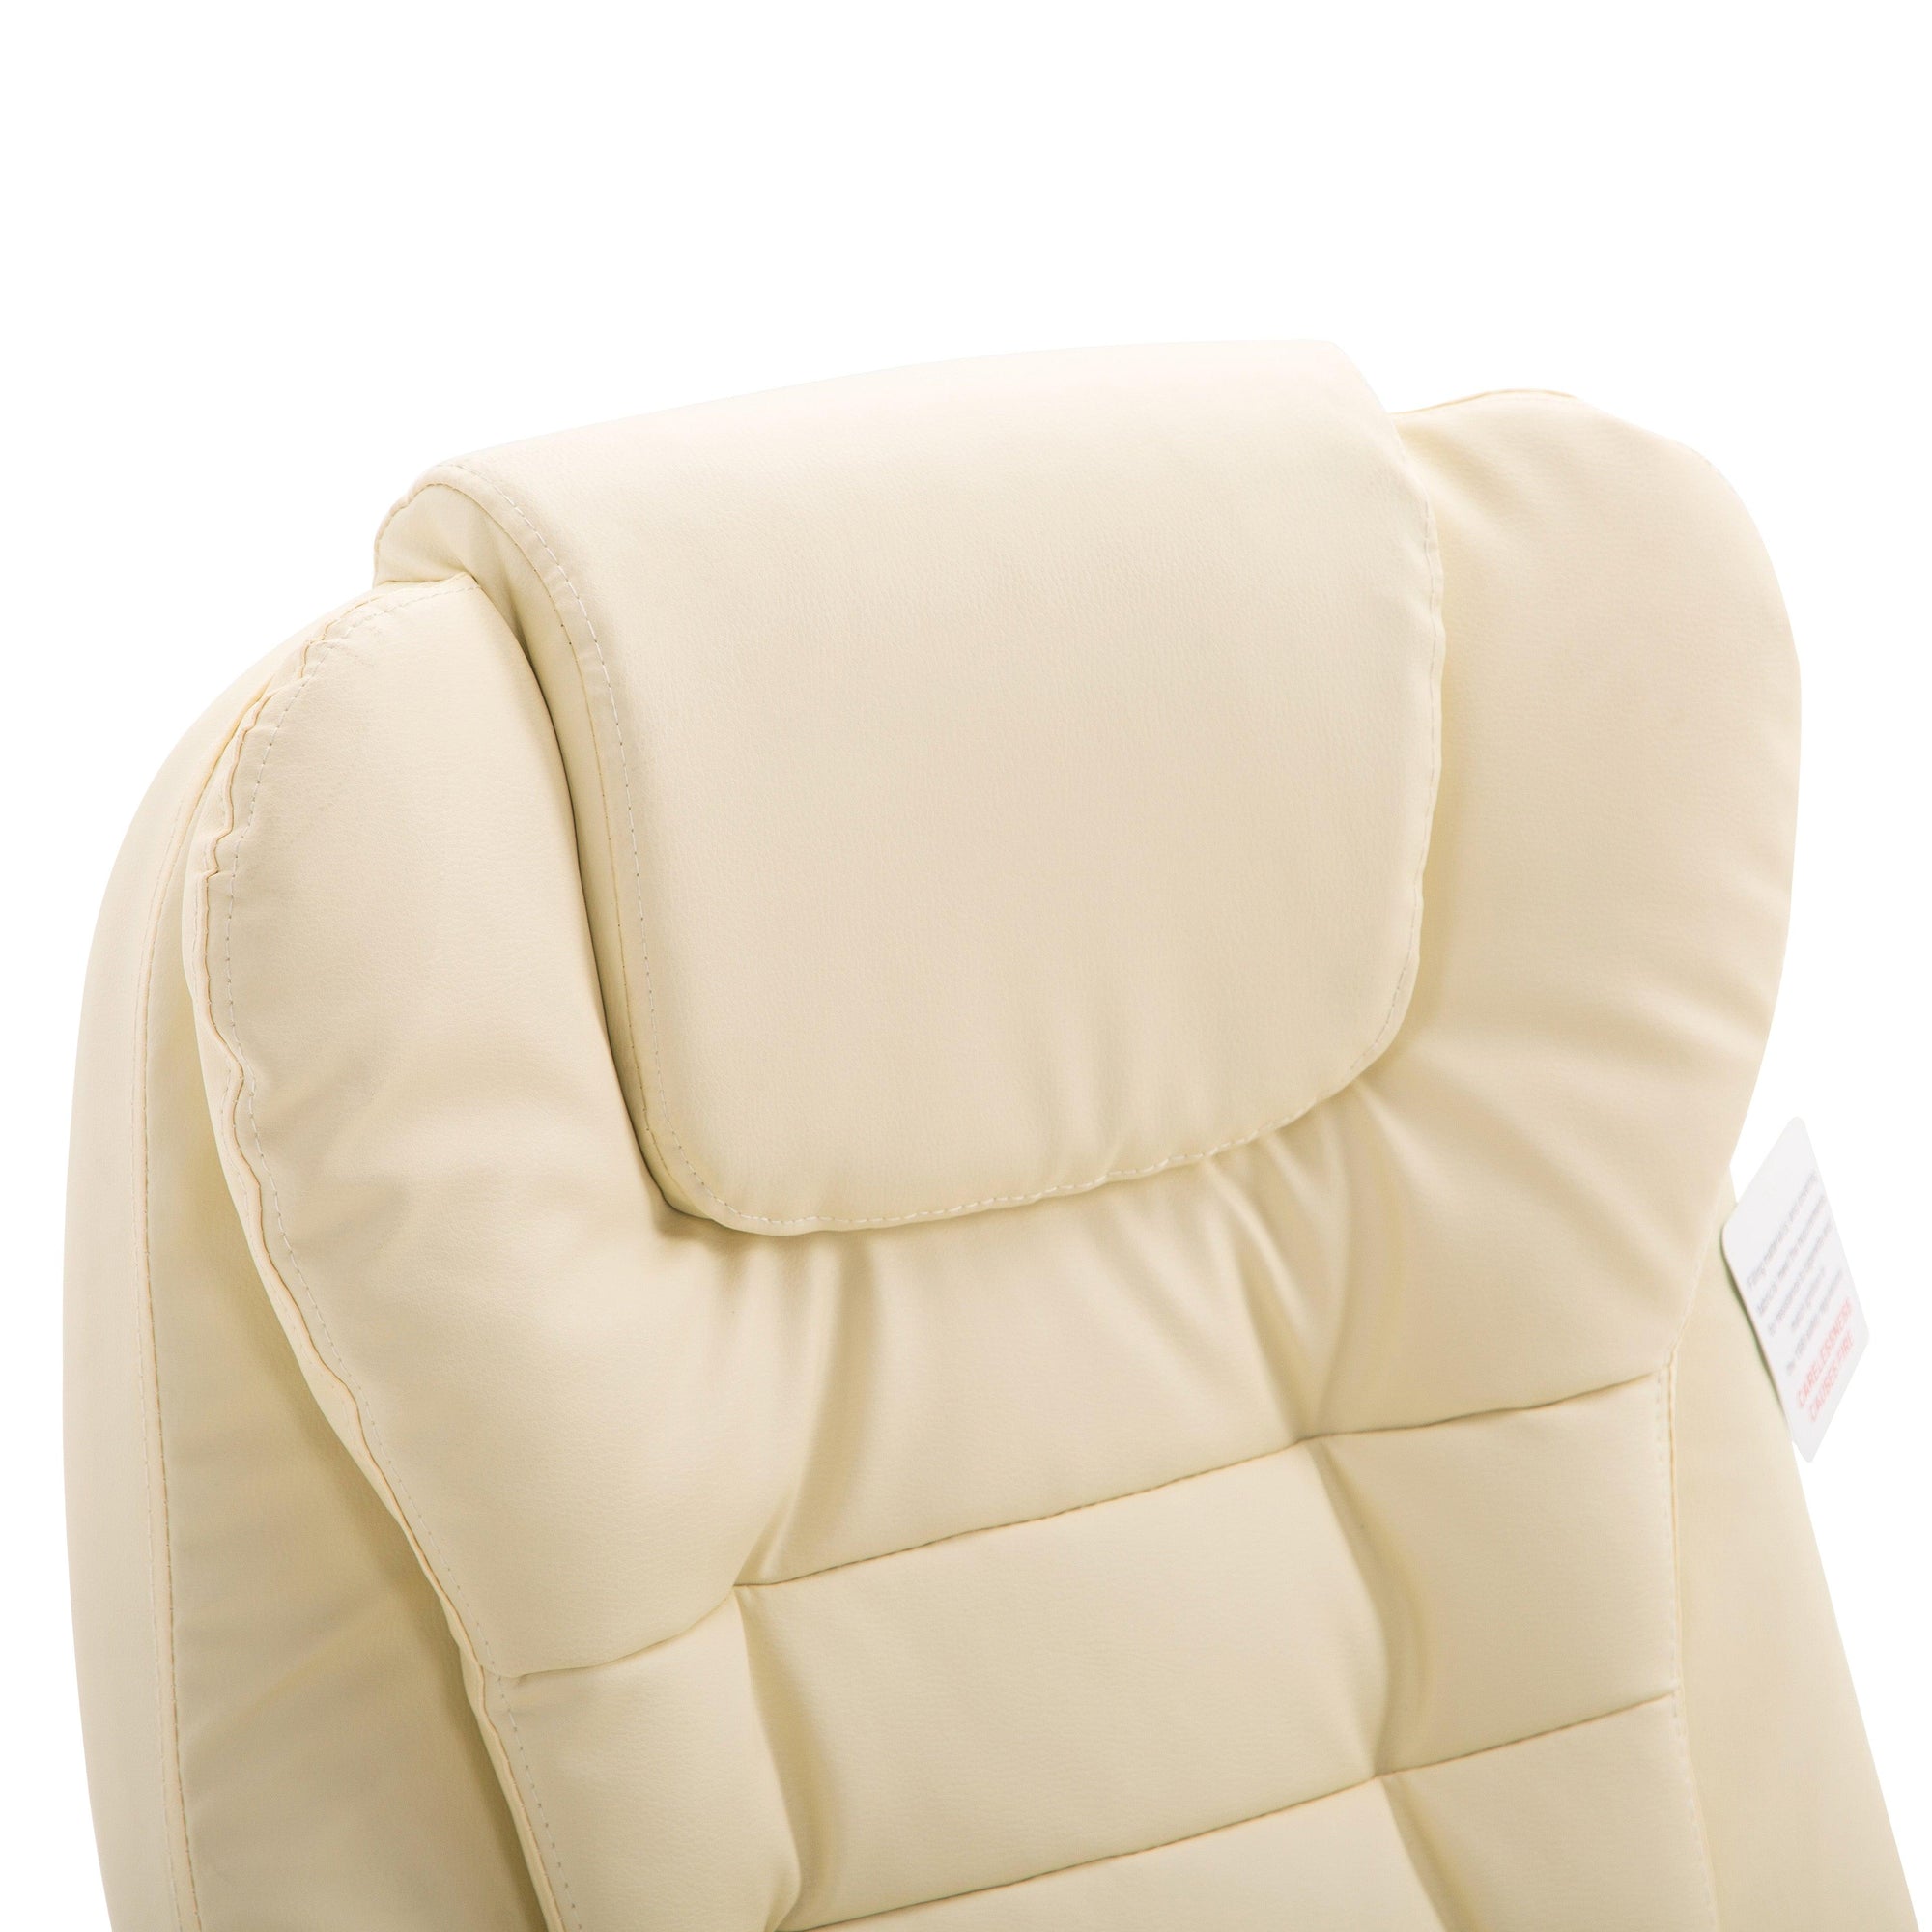 Executive Recline High Back Extra Padded Office Chair, MO17 Cream